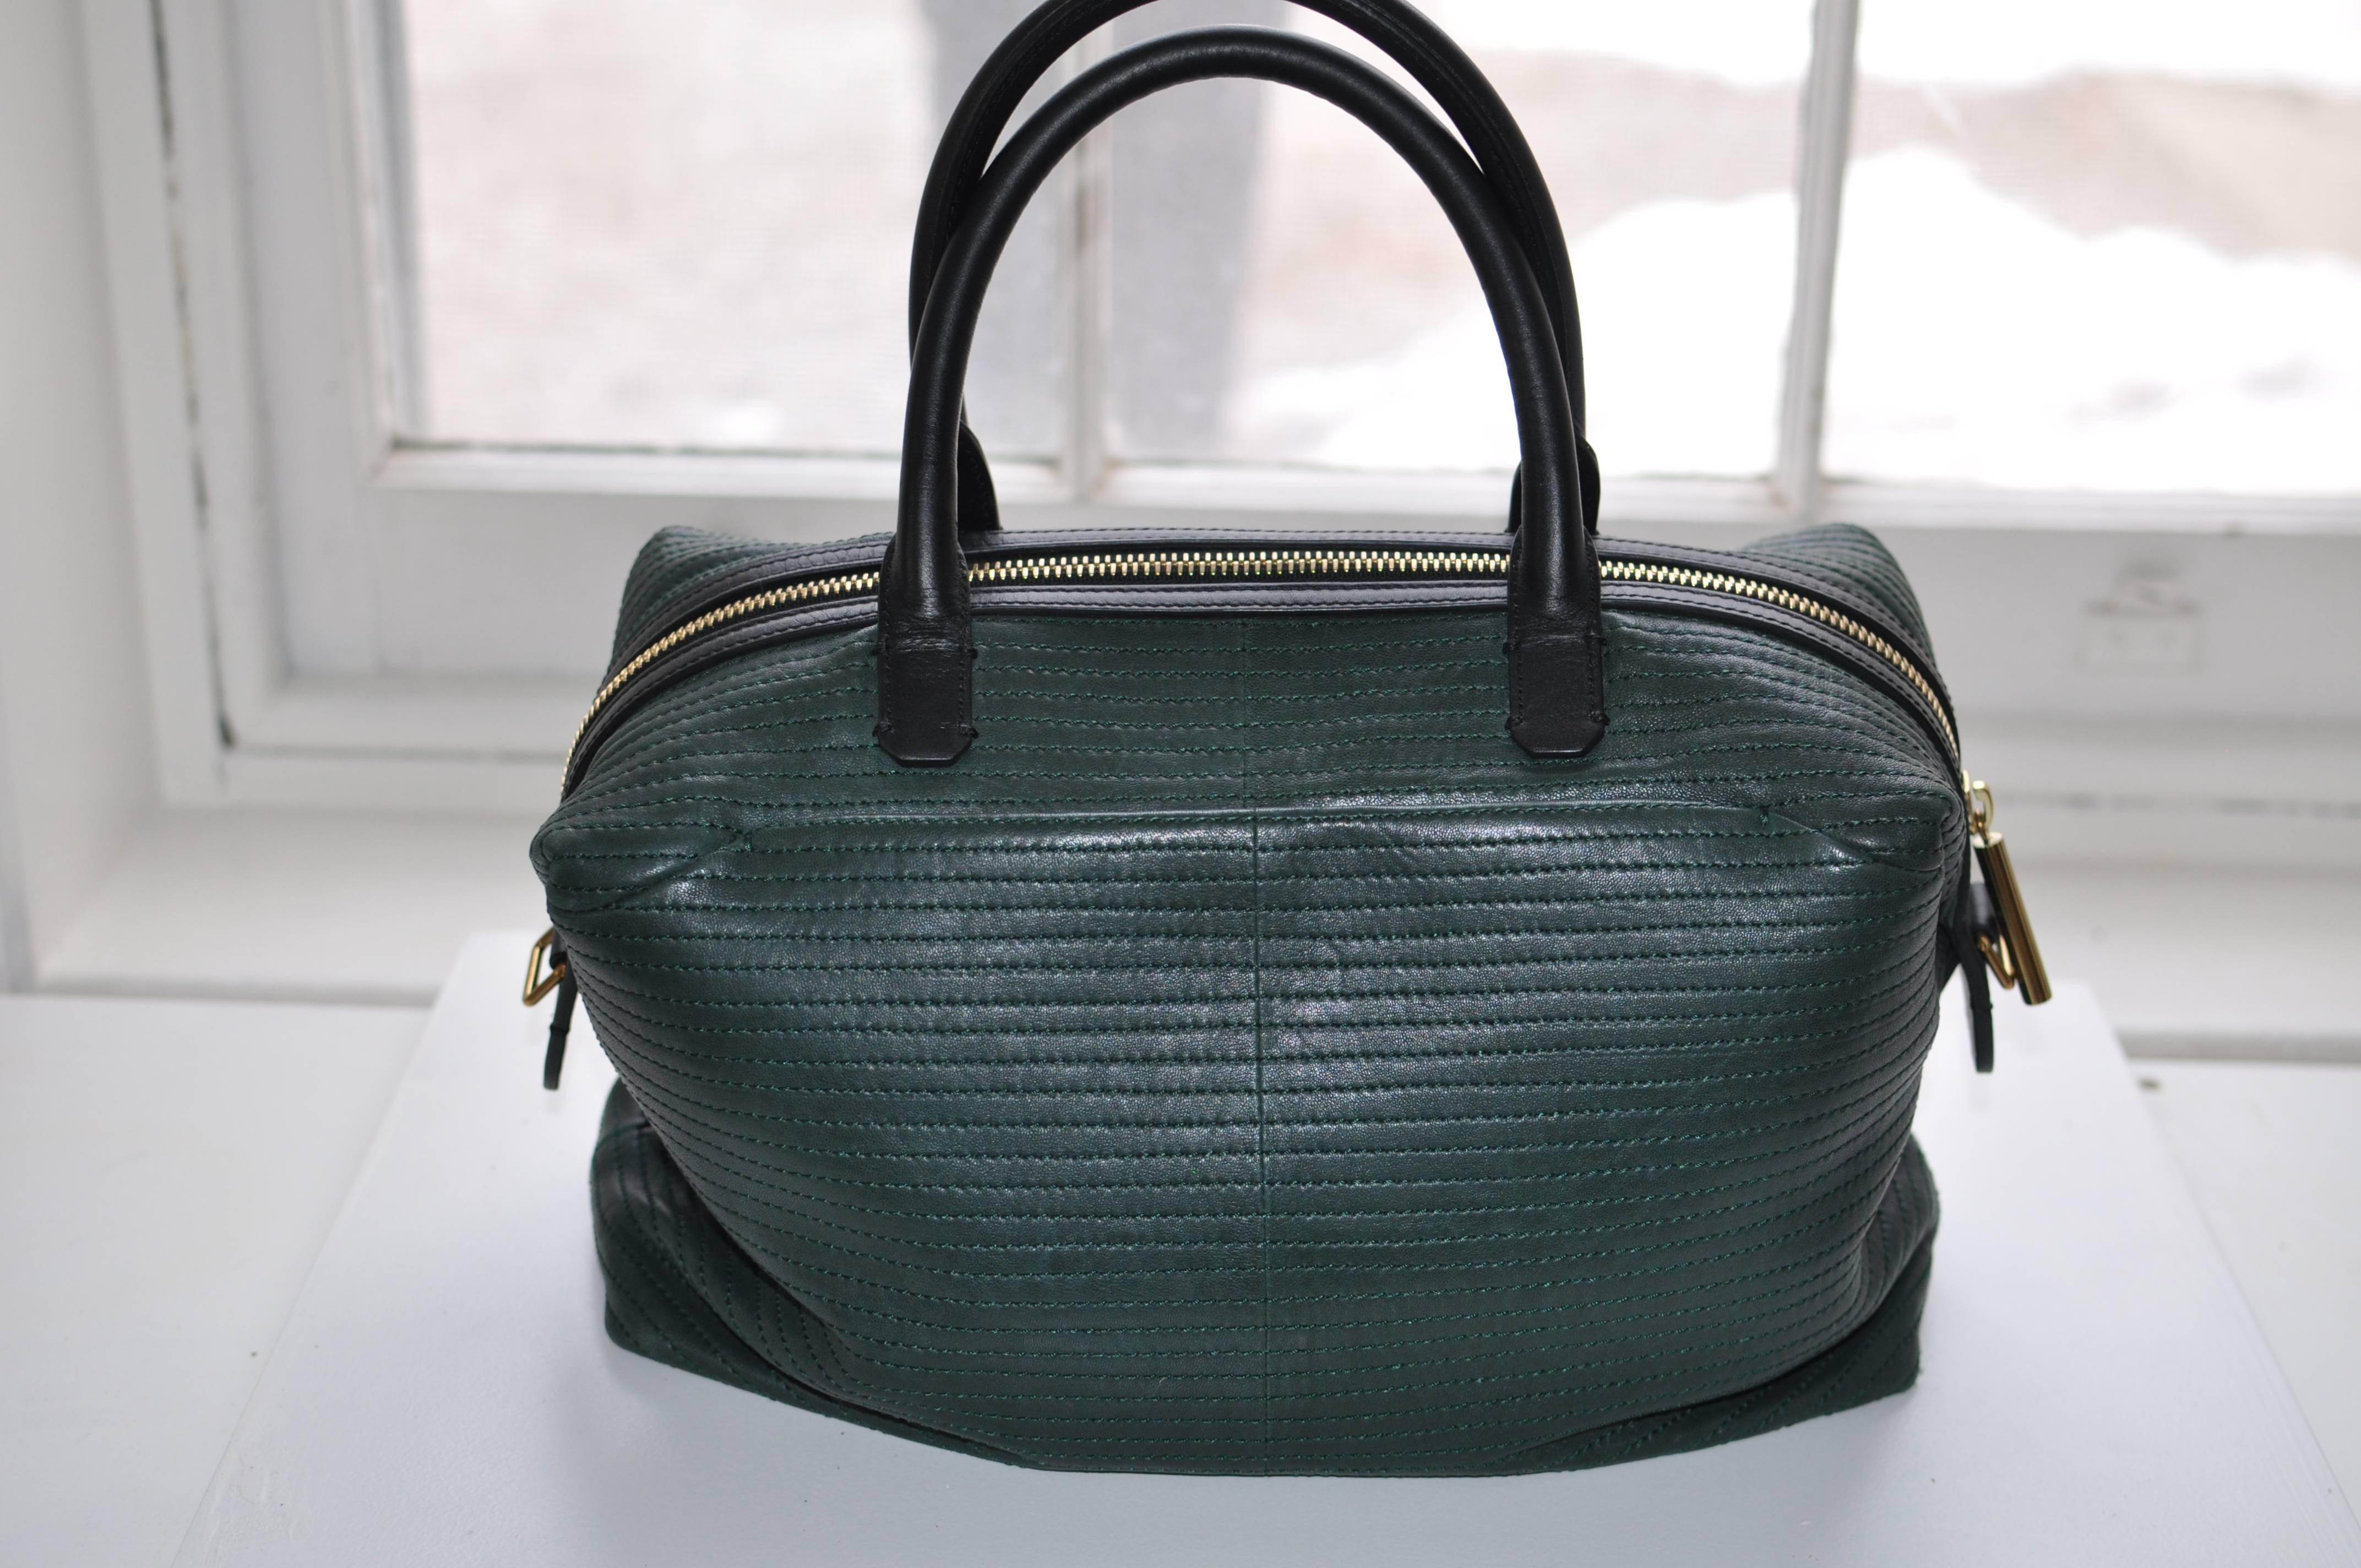 Black Lanvin Padam Forest Green Bowling  Leather Handbag with Top Handles